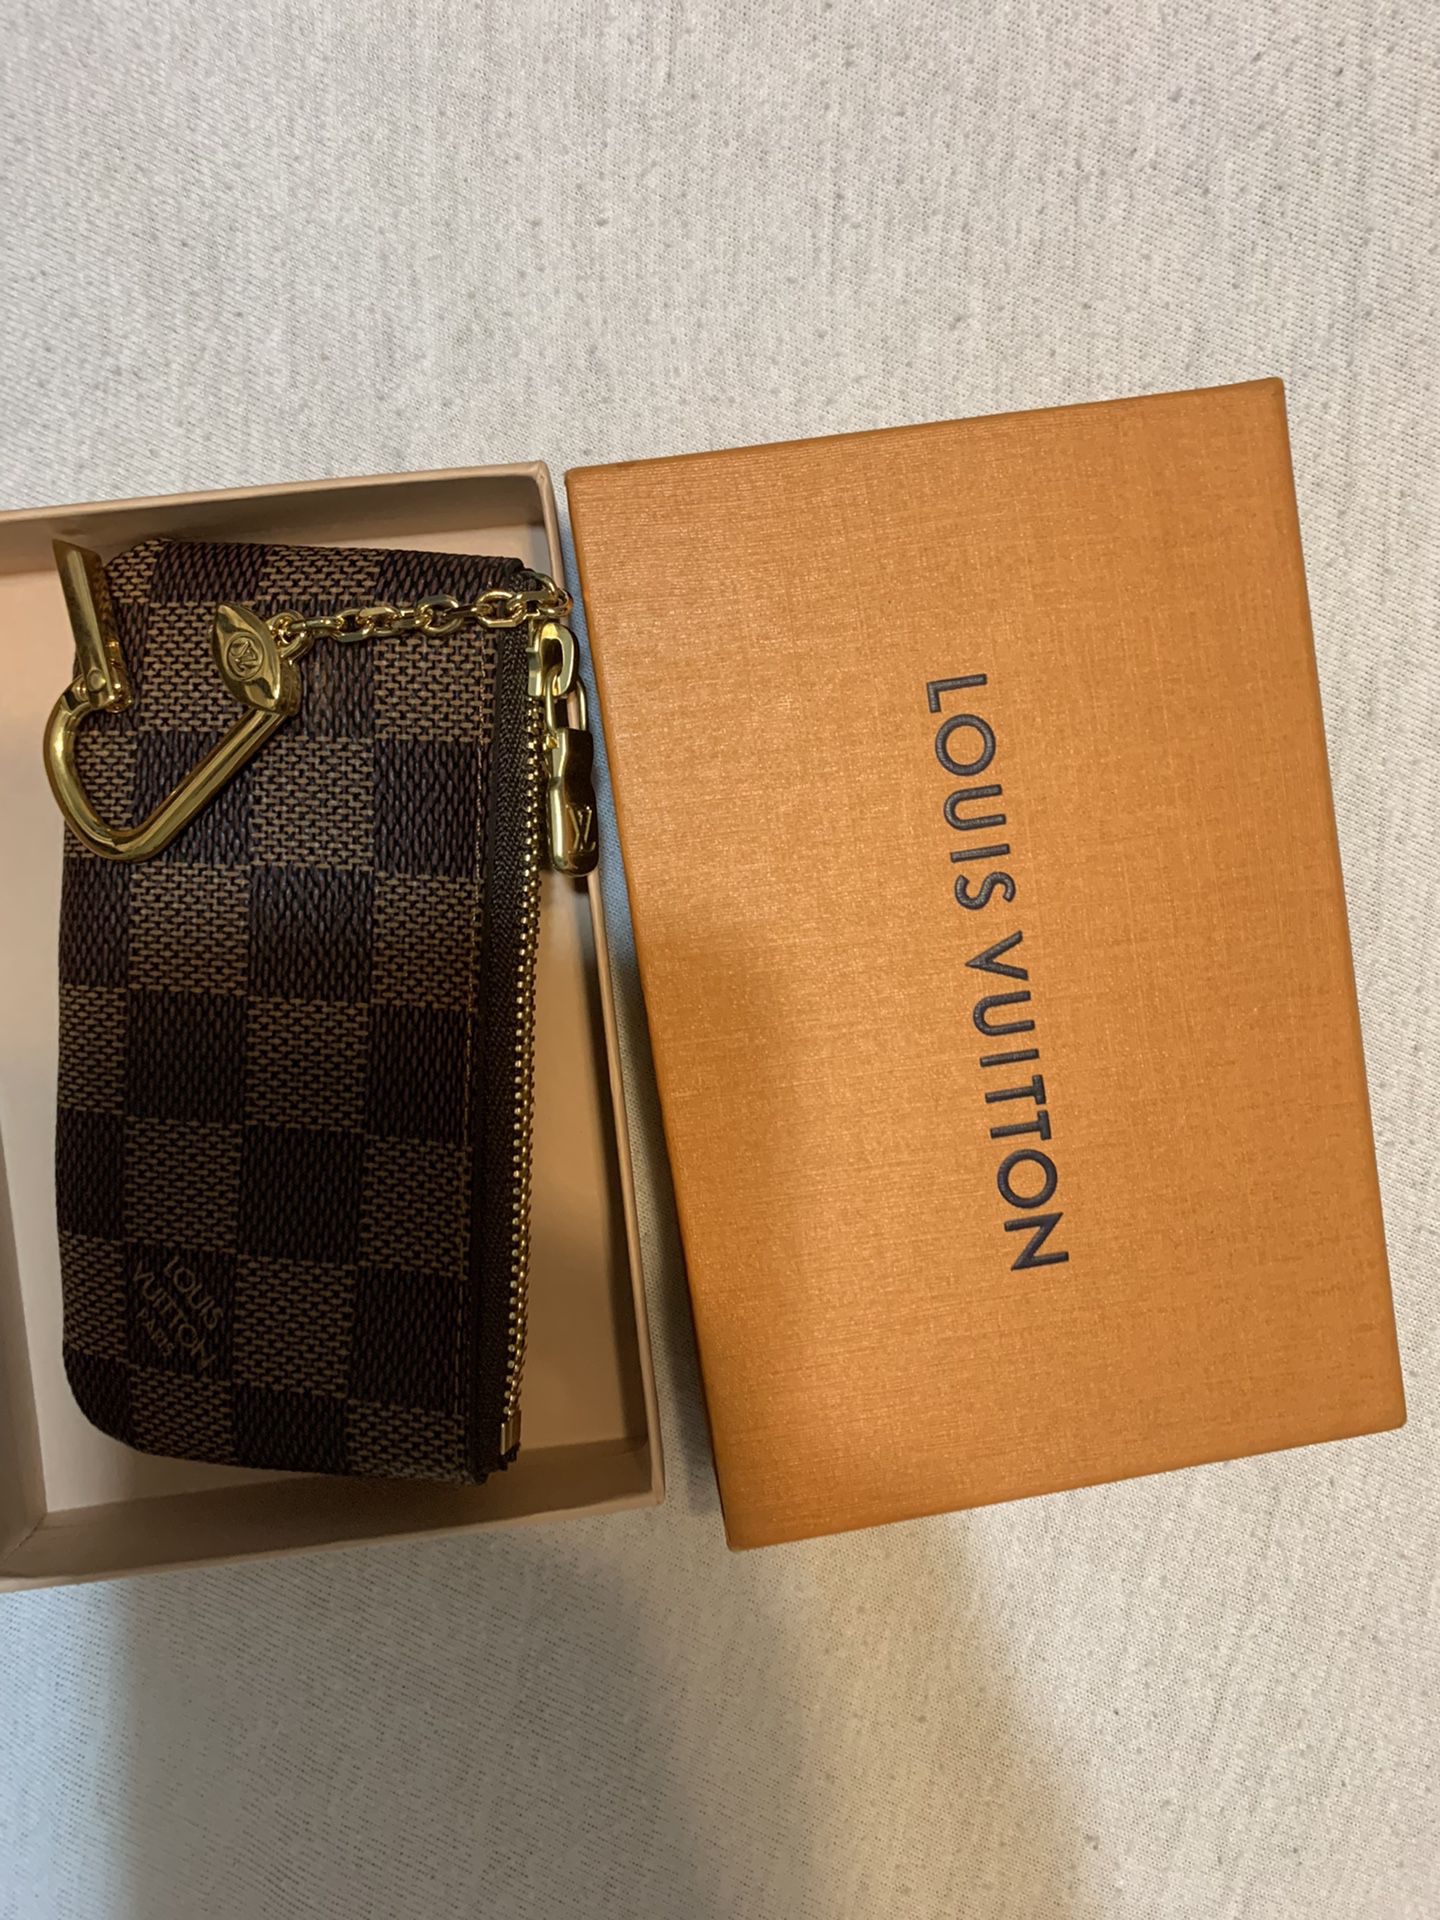 BRAND NEW LOUIS VUITTON AND GUCCI SHOPPING BAGS AND BOXES for Sale in Fort  Lauderdale, FL - OfferUp